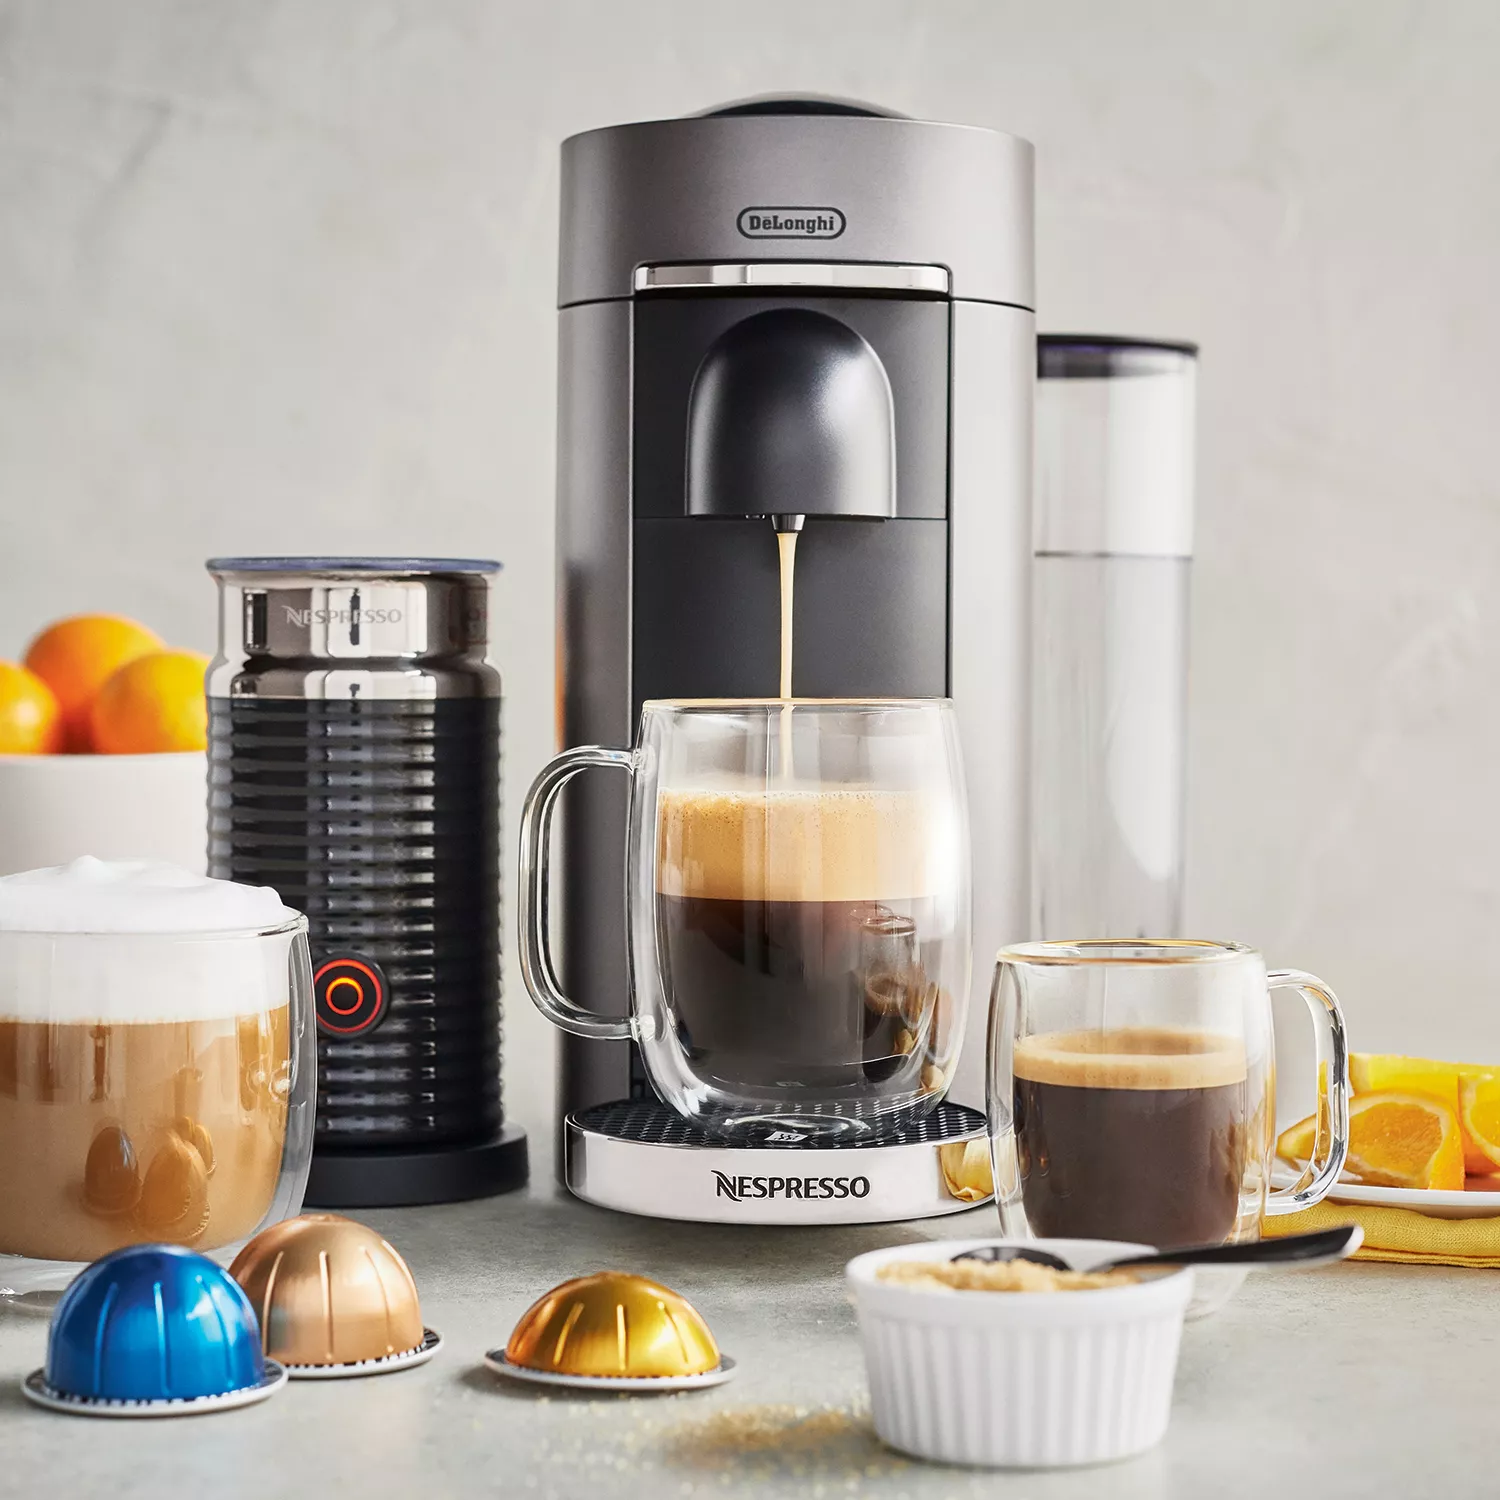 Nespresso VertuoPlus Deluxe by De'Longhi with Aeroccino3 Frother